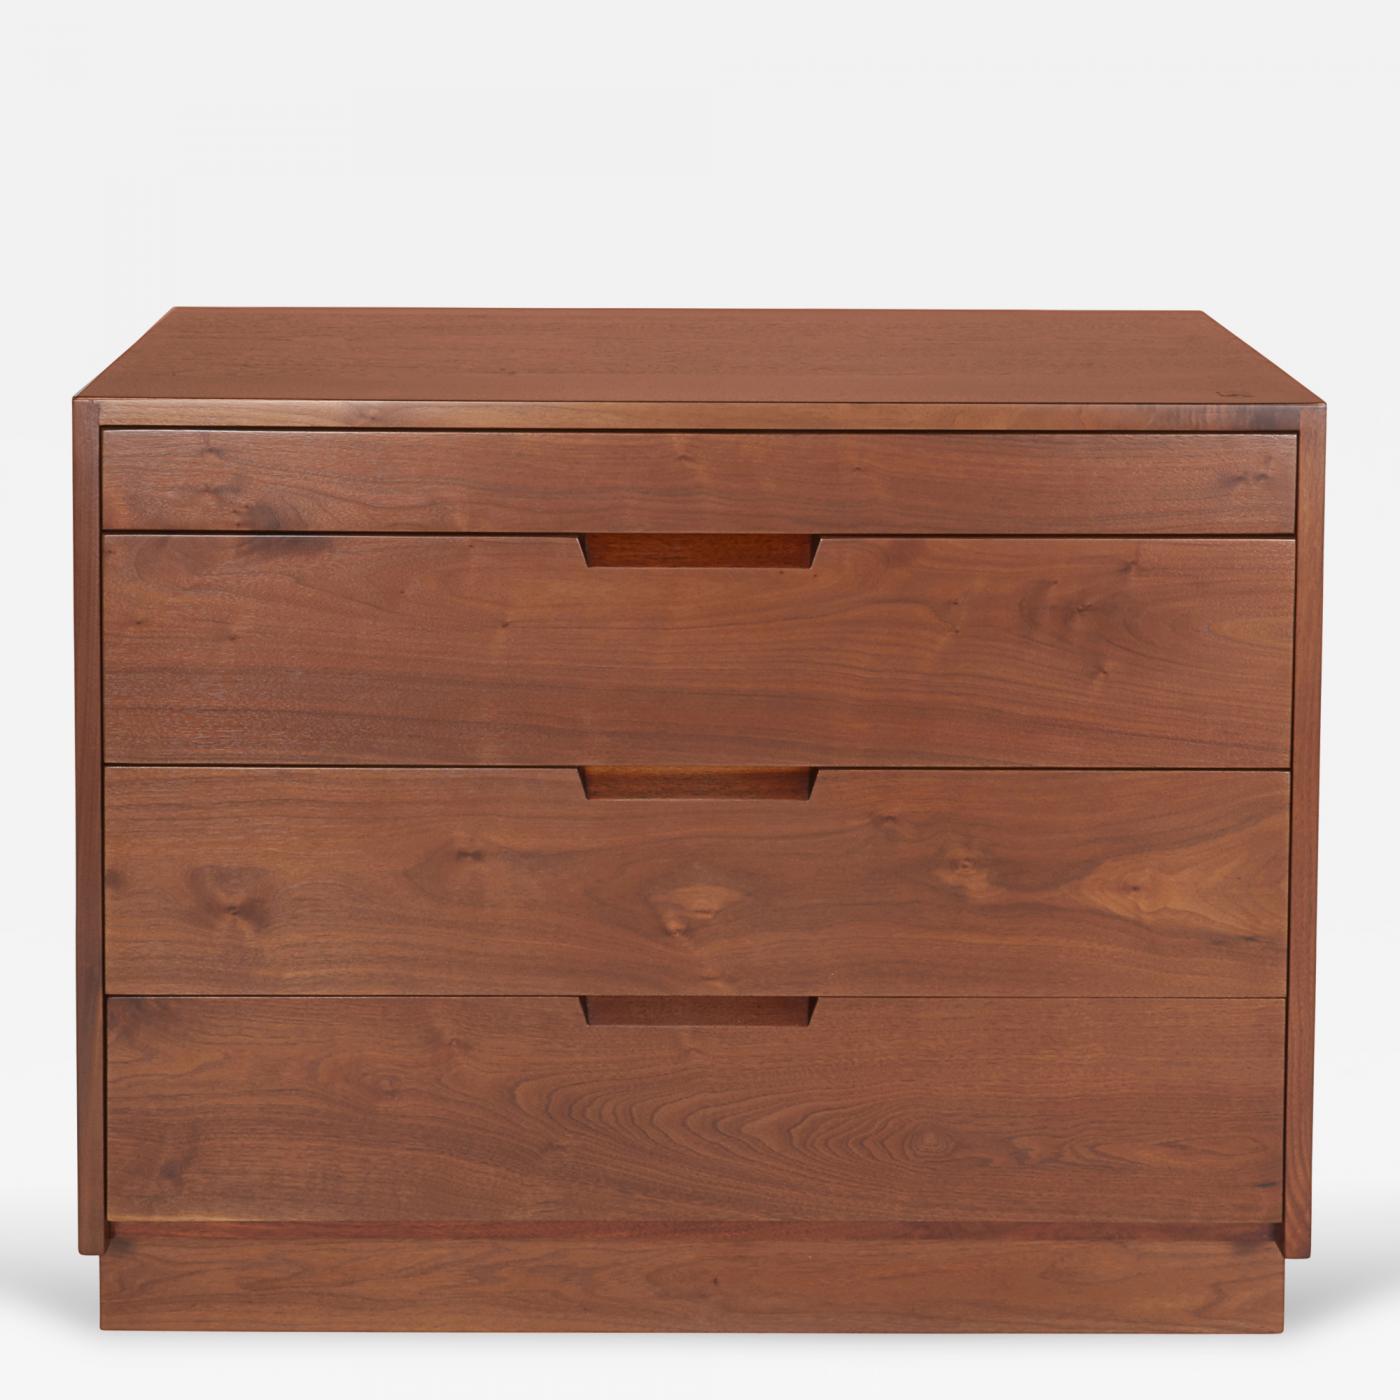 https://cdn.incollect.com/sites/default/files/zoom/George-Nakashima-Chest-of-Drawers-155281-170205.jpg